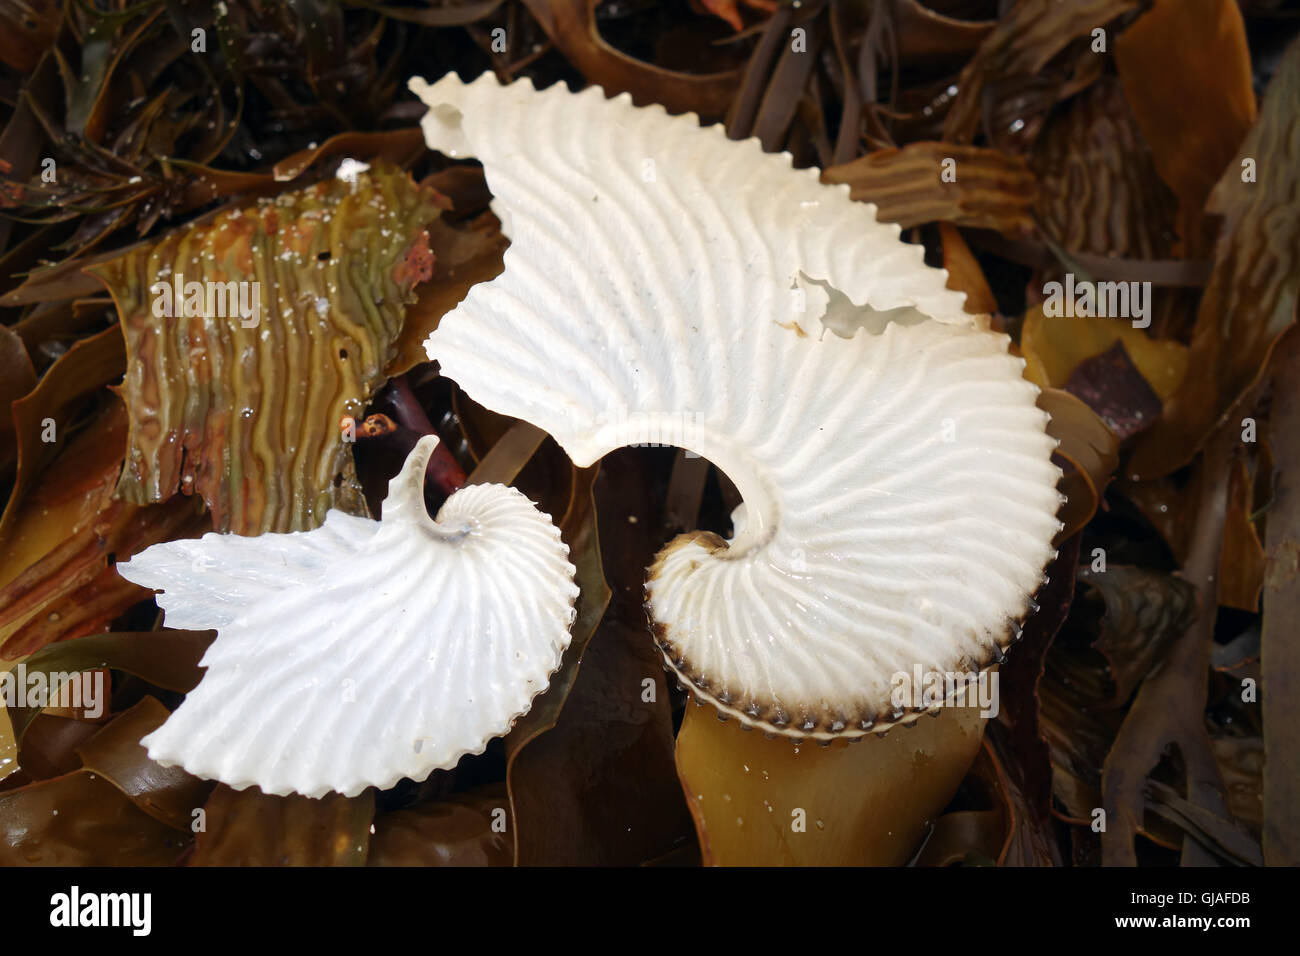 Paper nautilus (egg cases made by Argonauta sp. octopuses) washed up in Aldridge Cove, Nuyts Wilderness Area, Western Australia Stock Photo